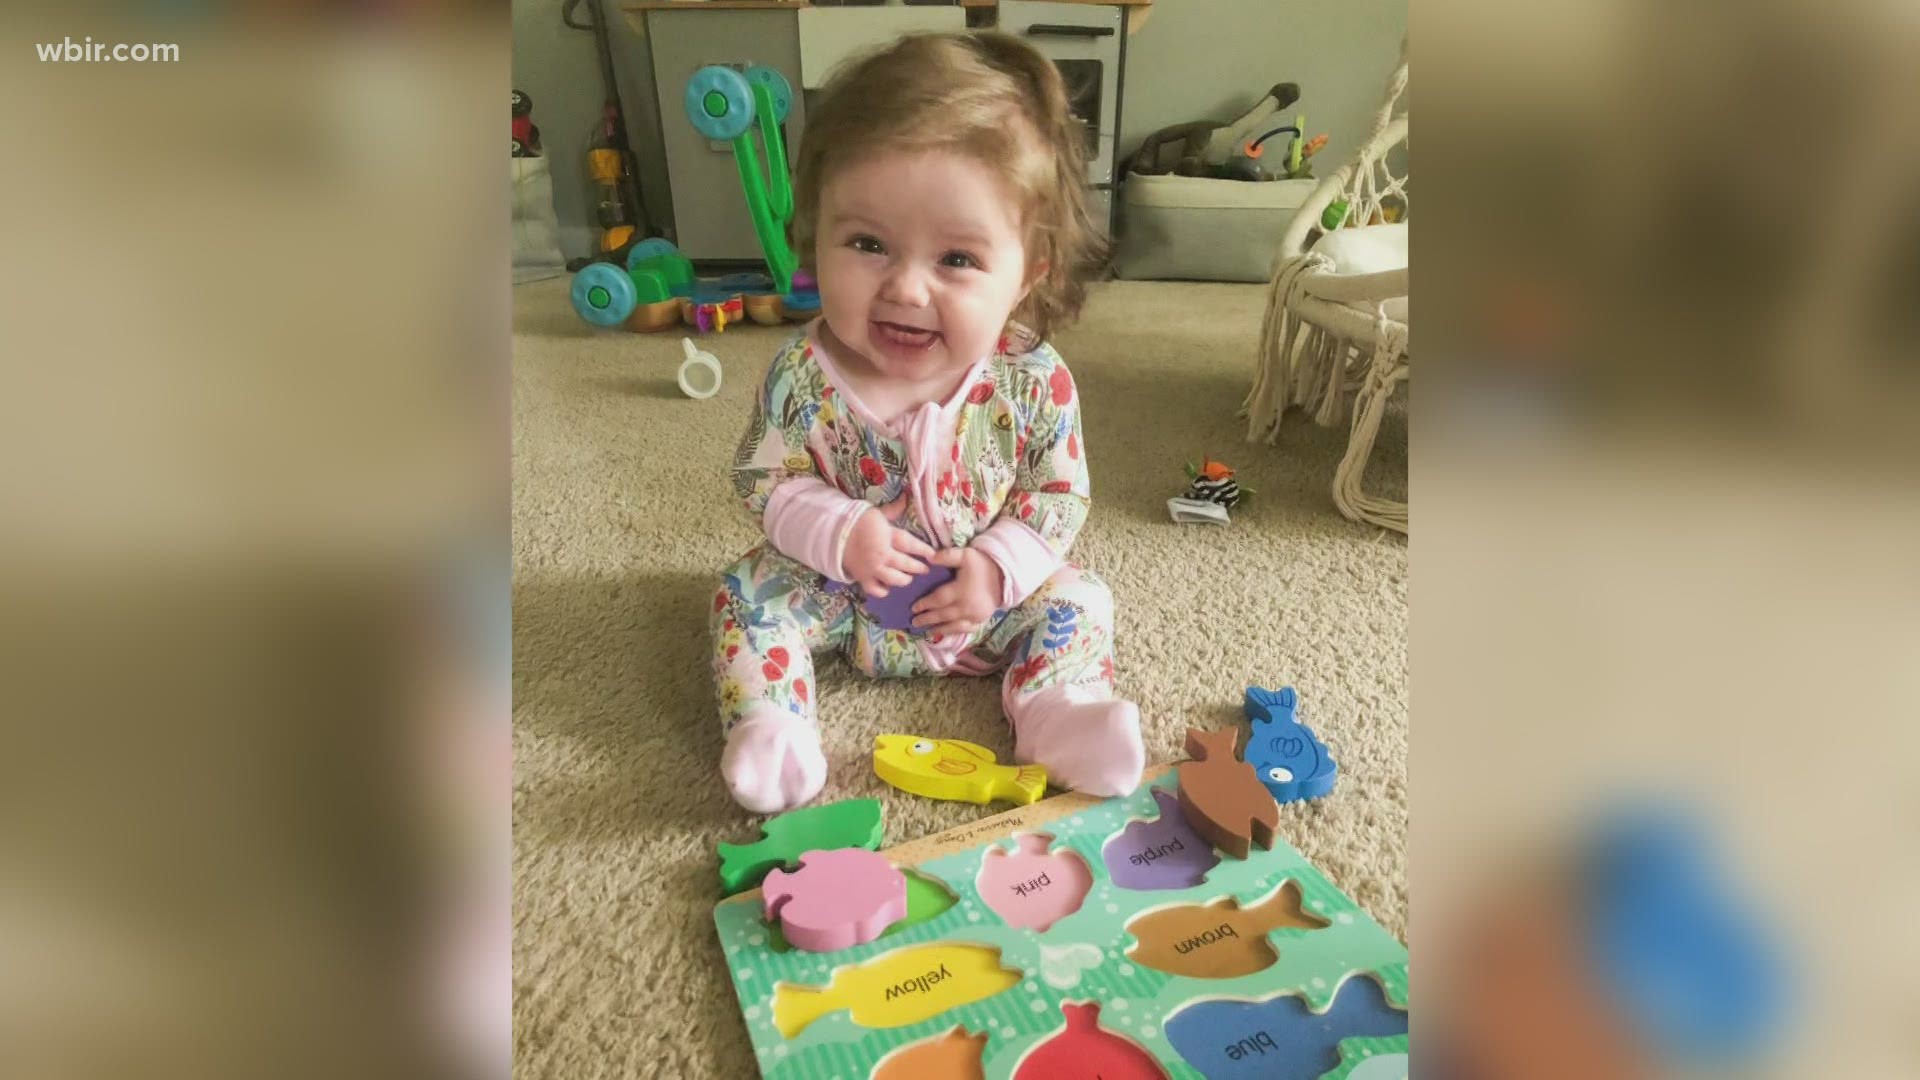 (Warning: Some photos may not be appropriate for younger viewers) || A family share's their ongoing fight for justice after their niece almost died in January.